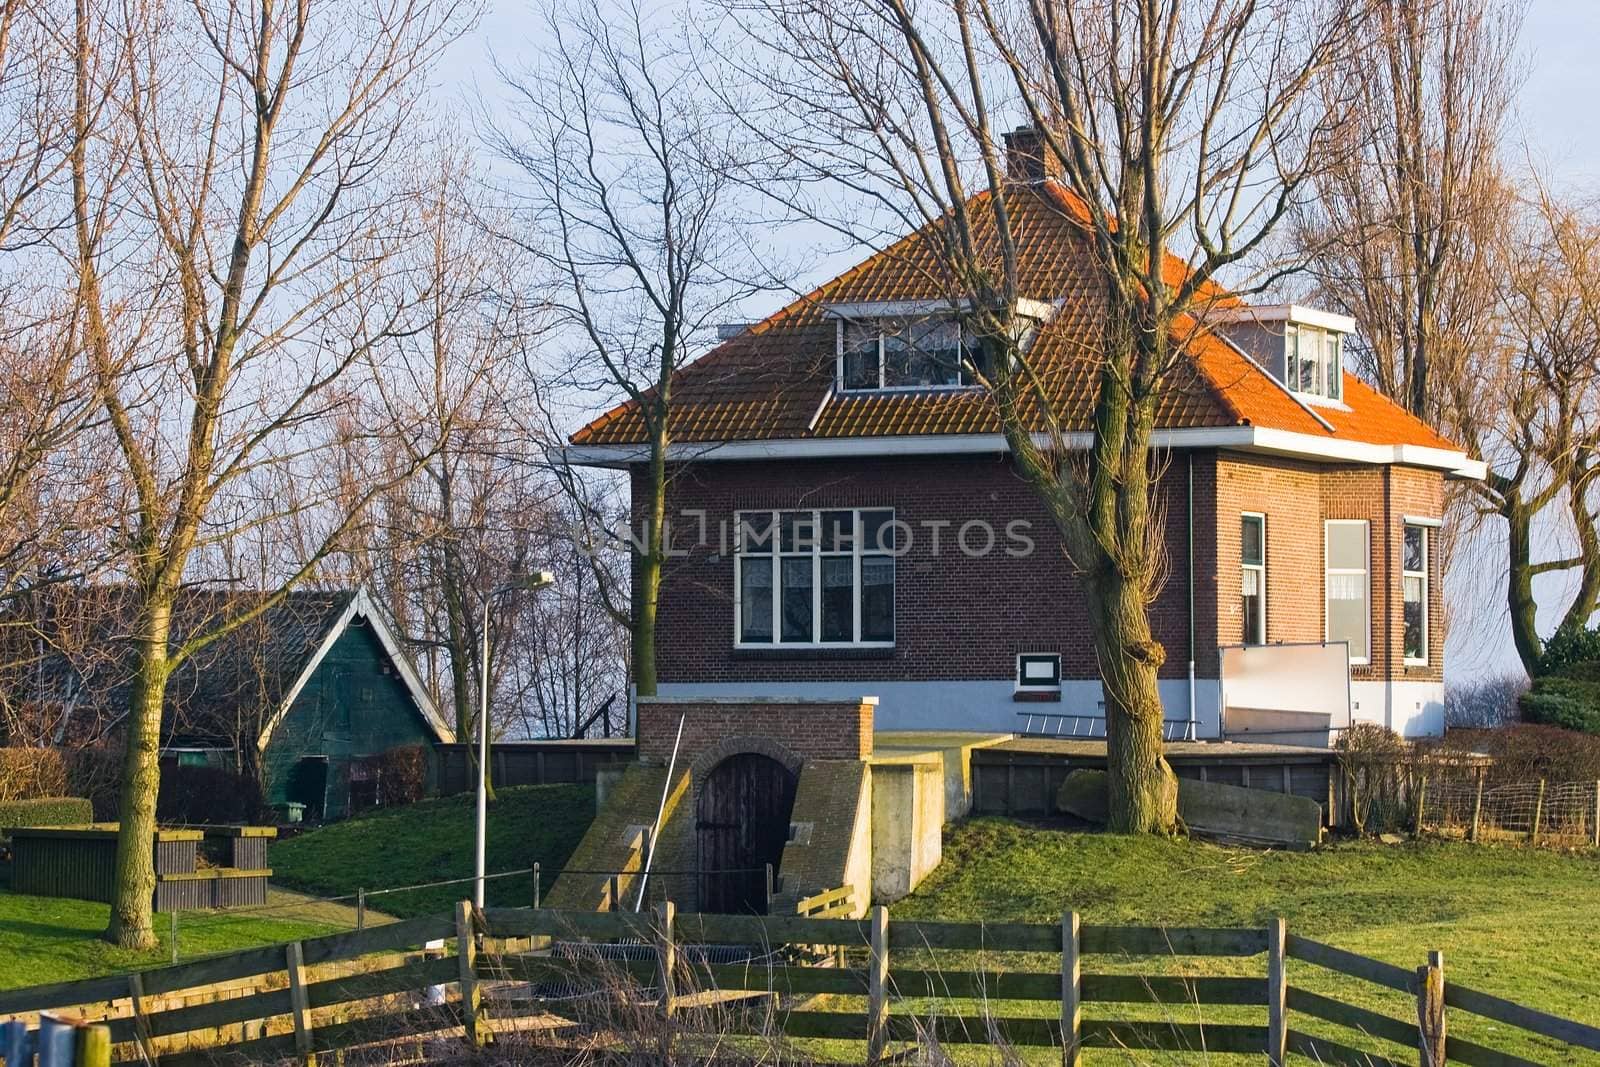 Dutch polder pumping station by Colette